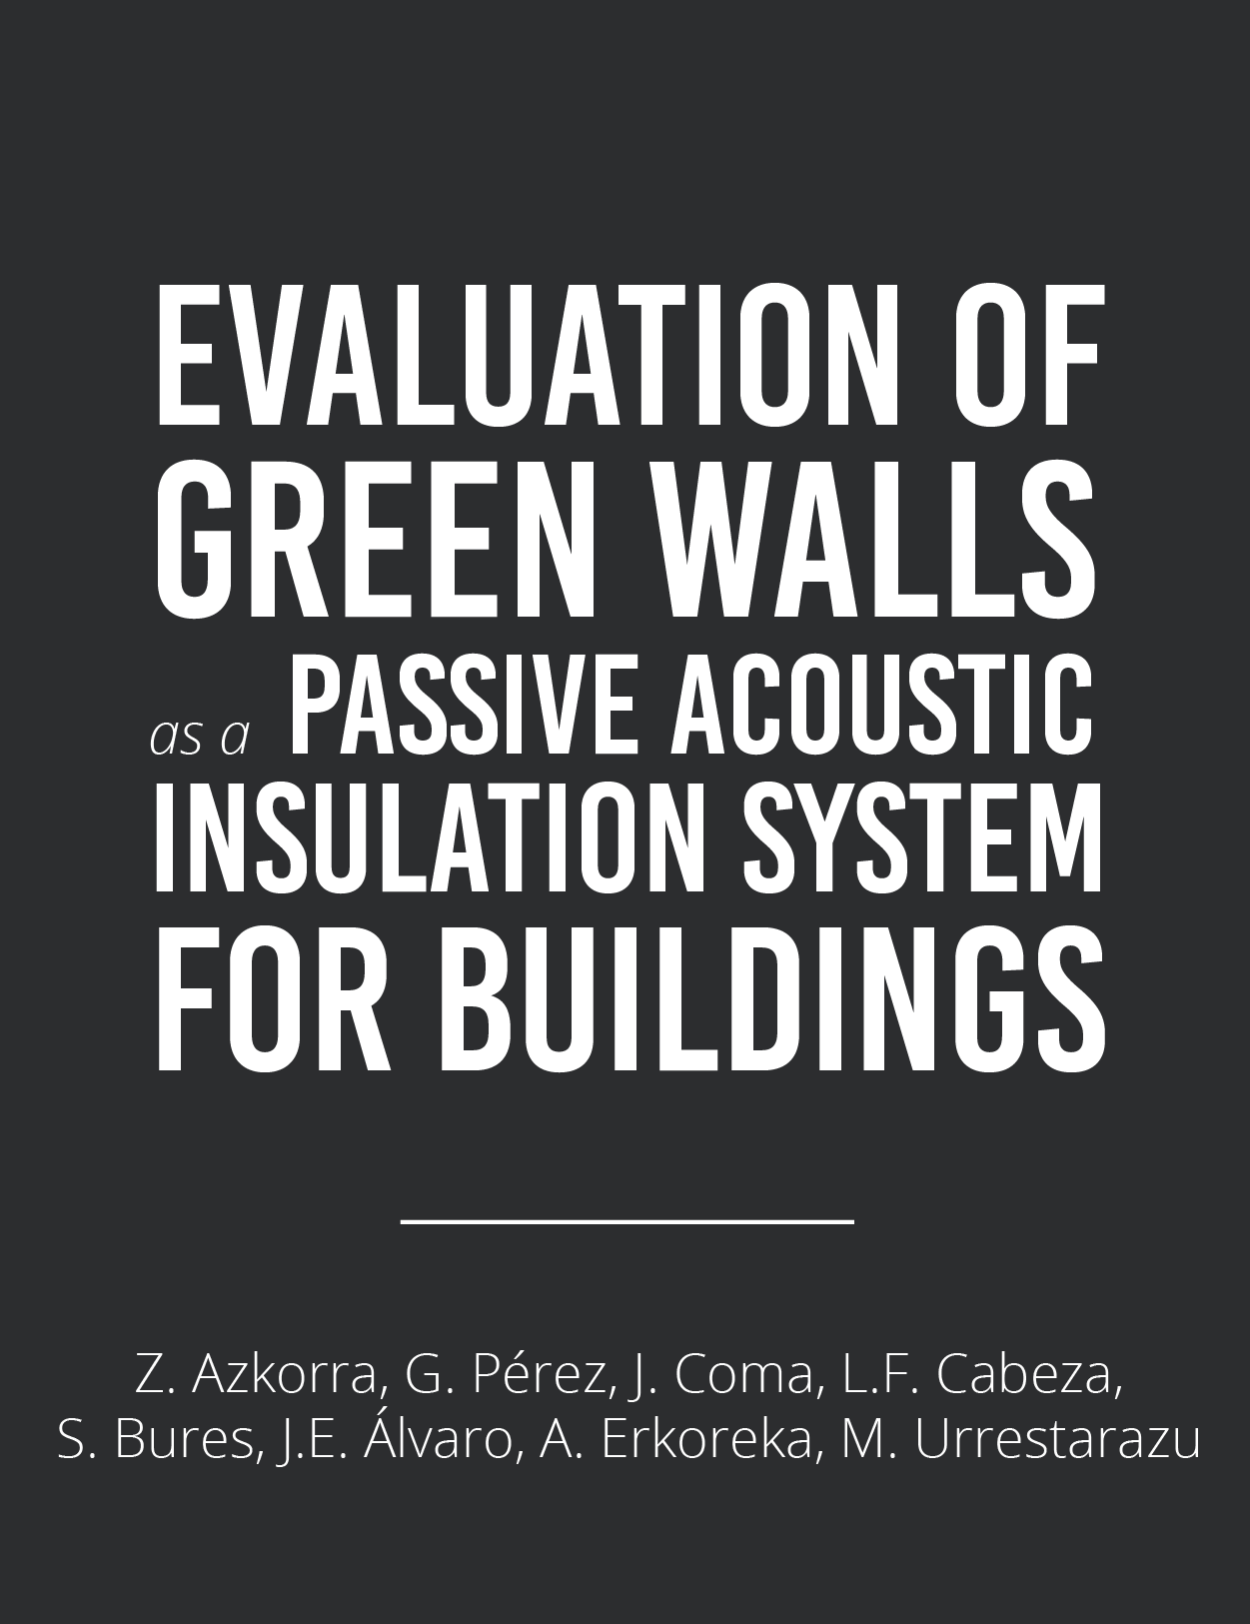 Green walls for sound insulation